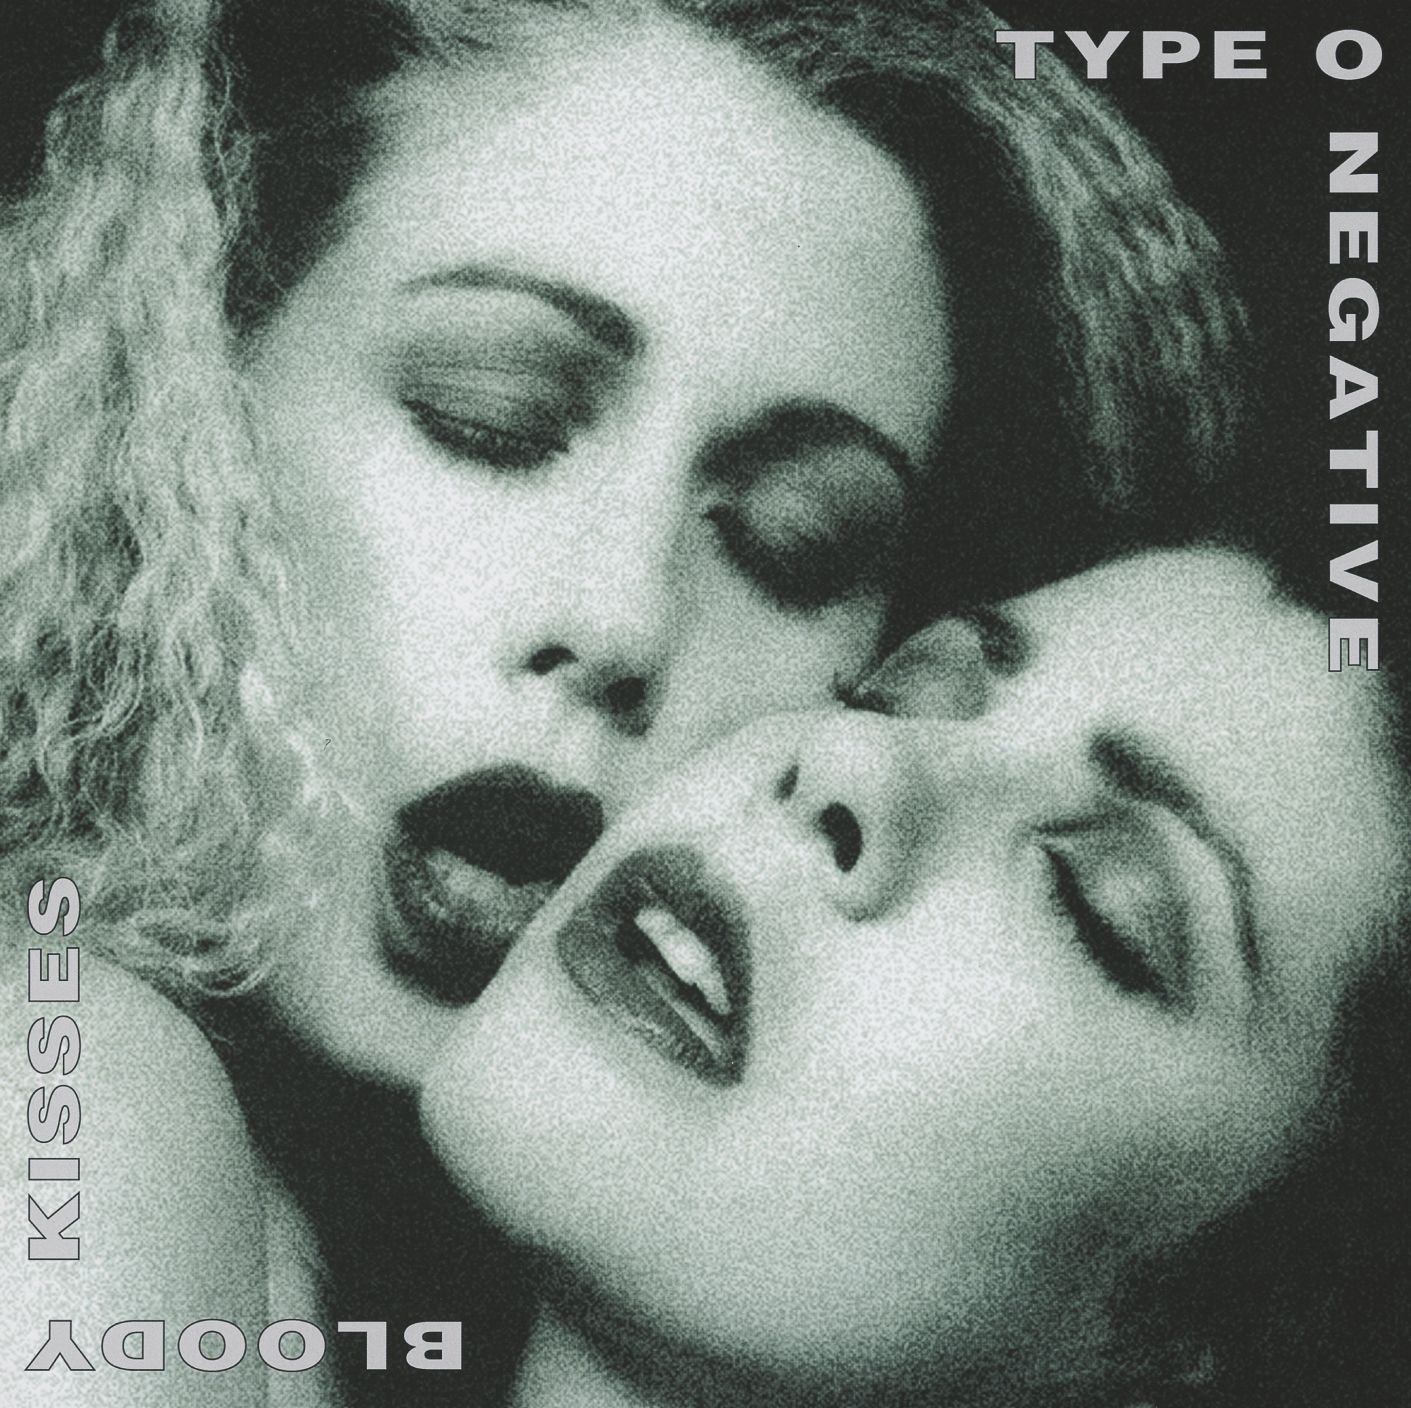 Cover art for Type O Negative's album Bloody Kisses, on which "Black No. 1 (Little Miss Scare-All)" appears.